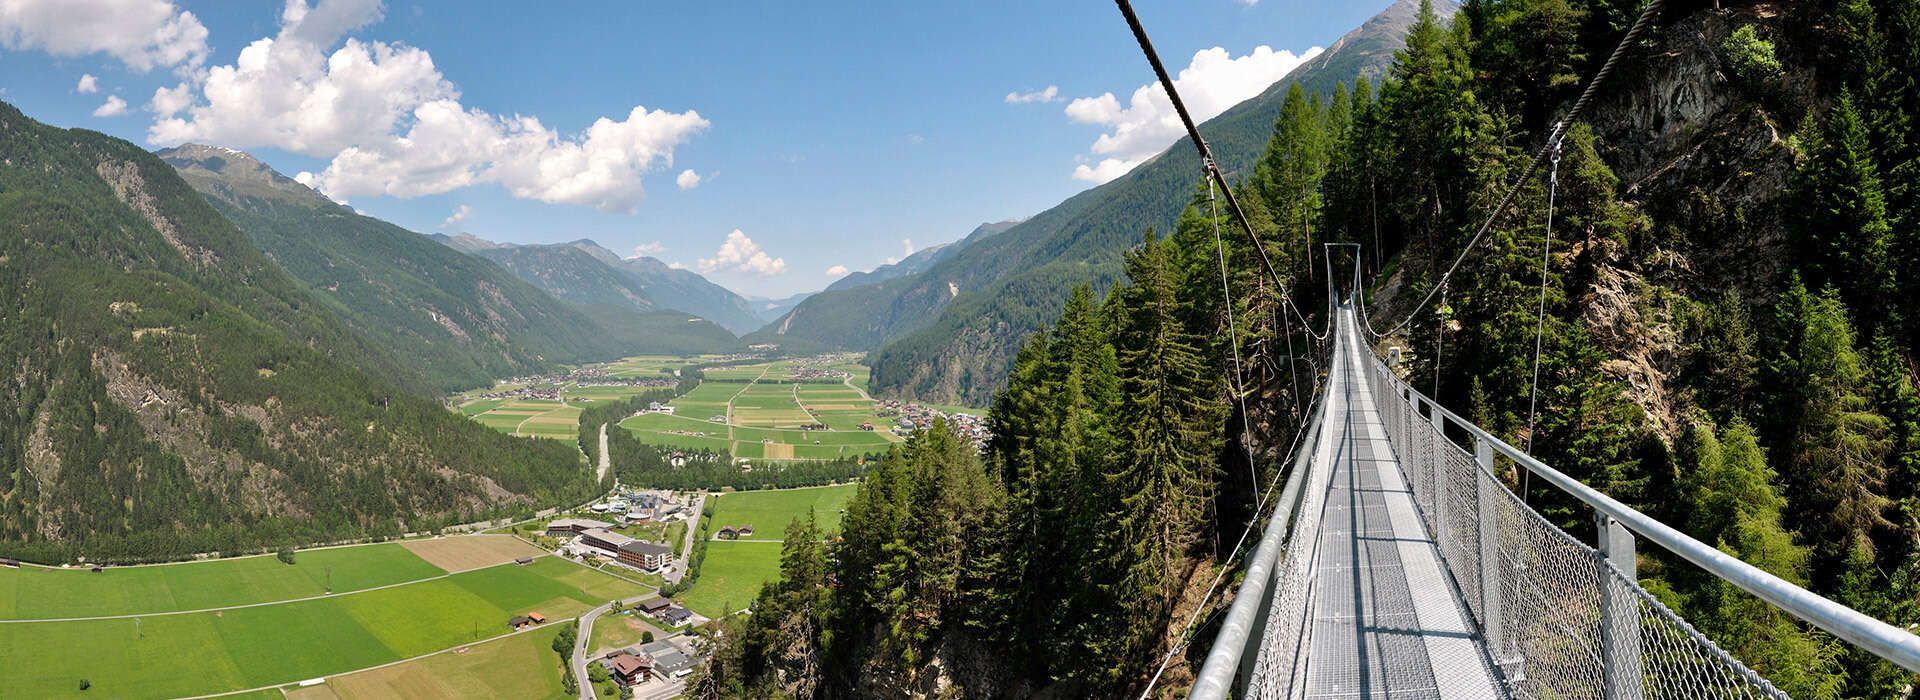 Suspension bridge with a view of Längenfeld and the Ötztal